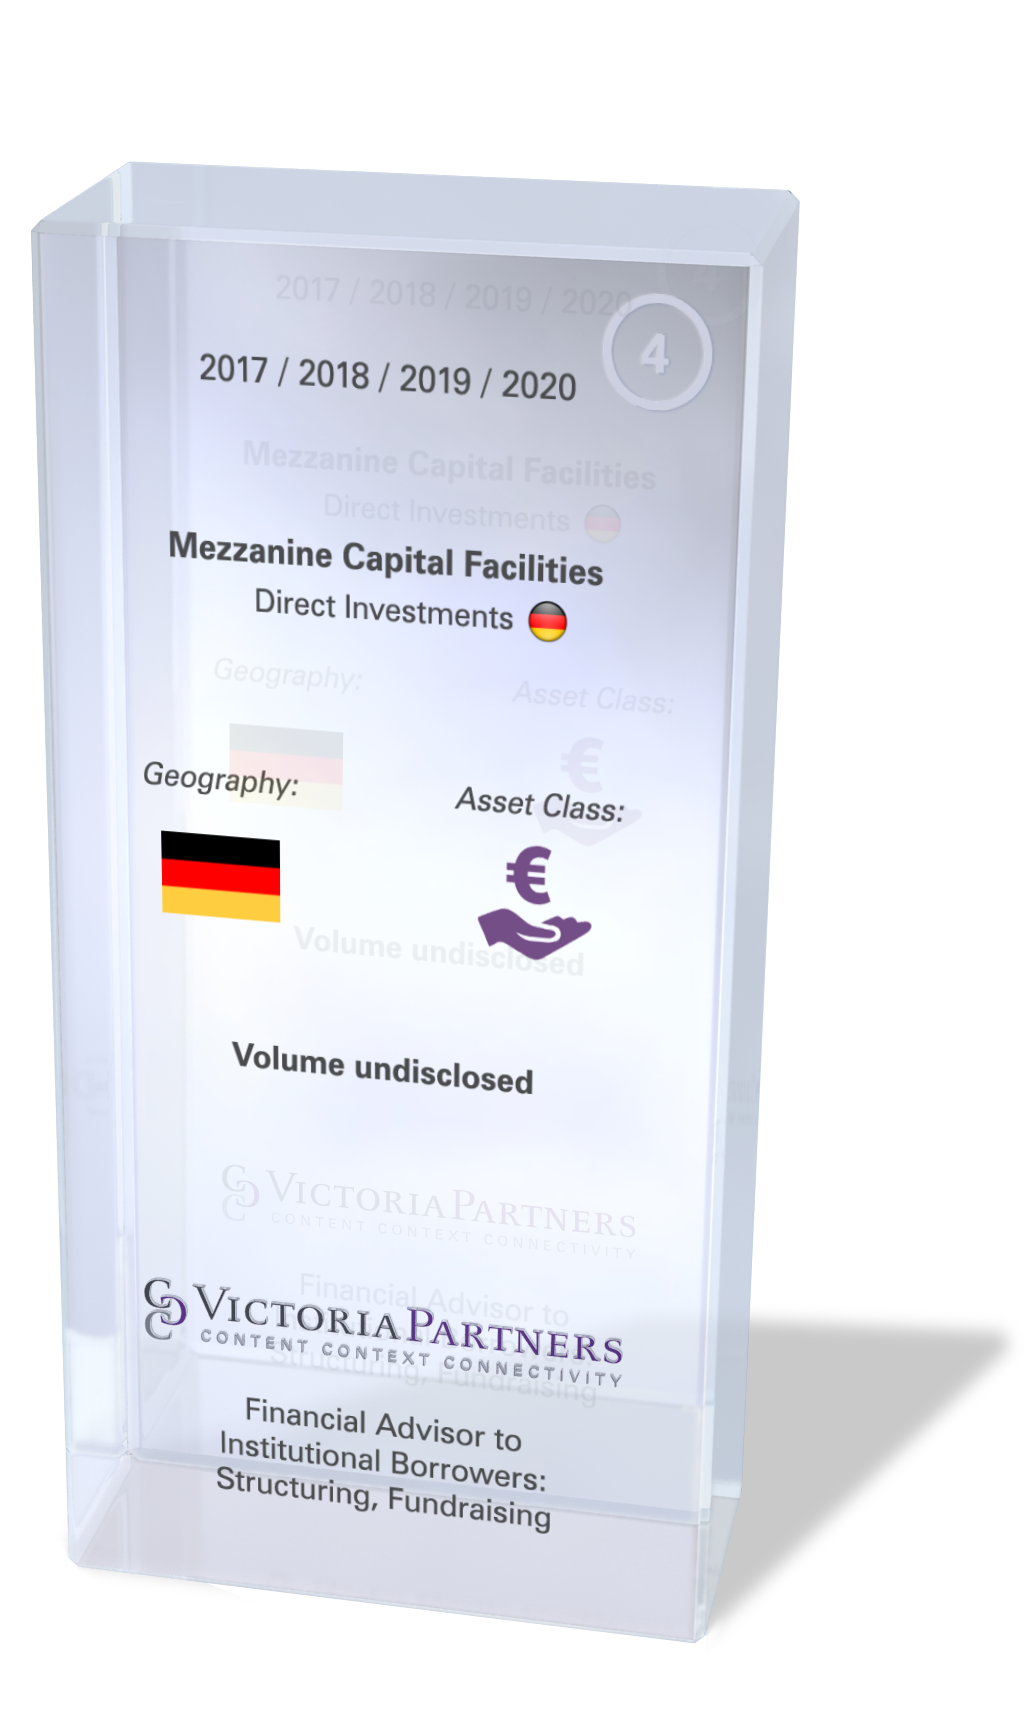 VICTORIAPARTNERS - Financial Advisor to Institutional Borrowers: Structuring, Fundraising in Germany - 2017/2018/2019/2020